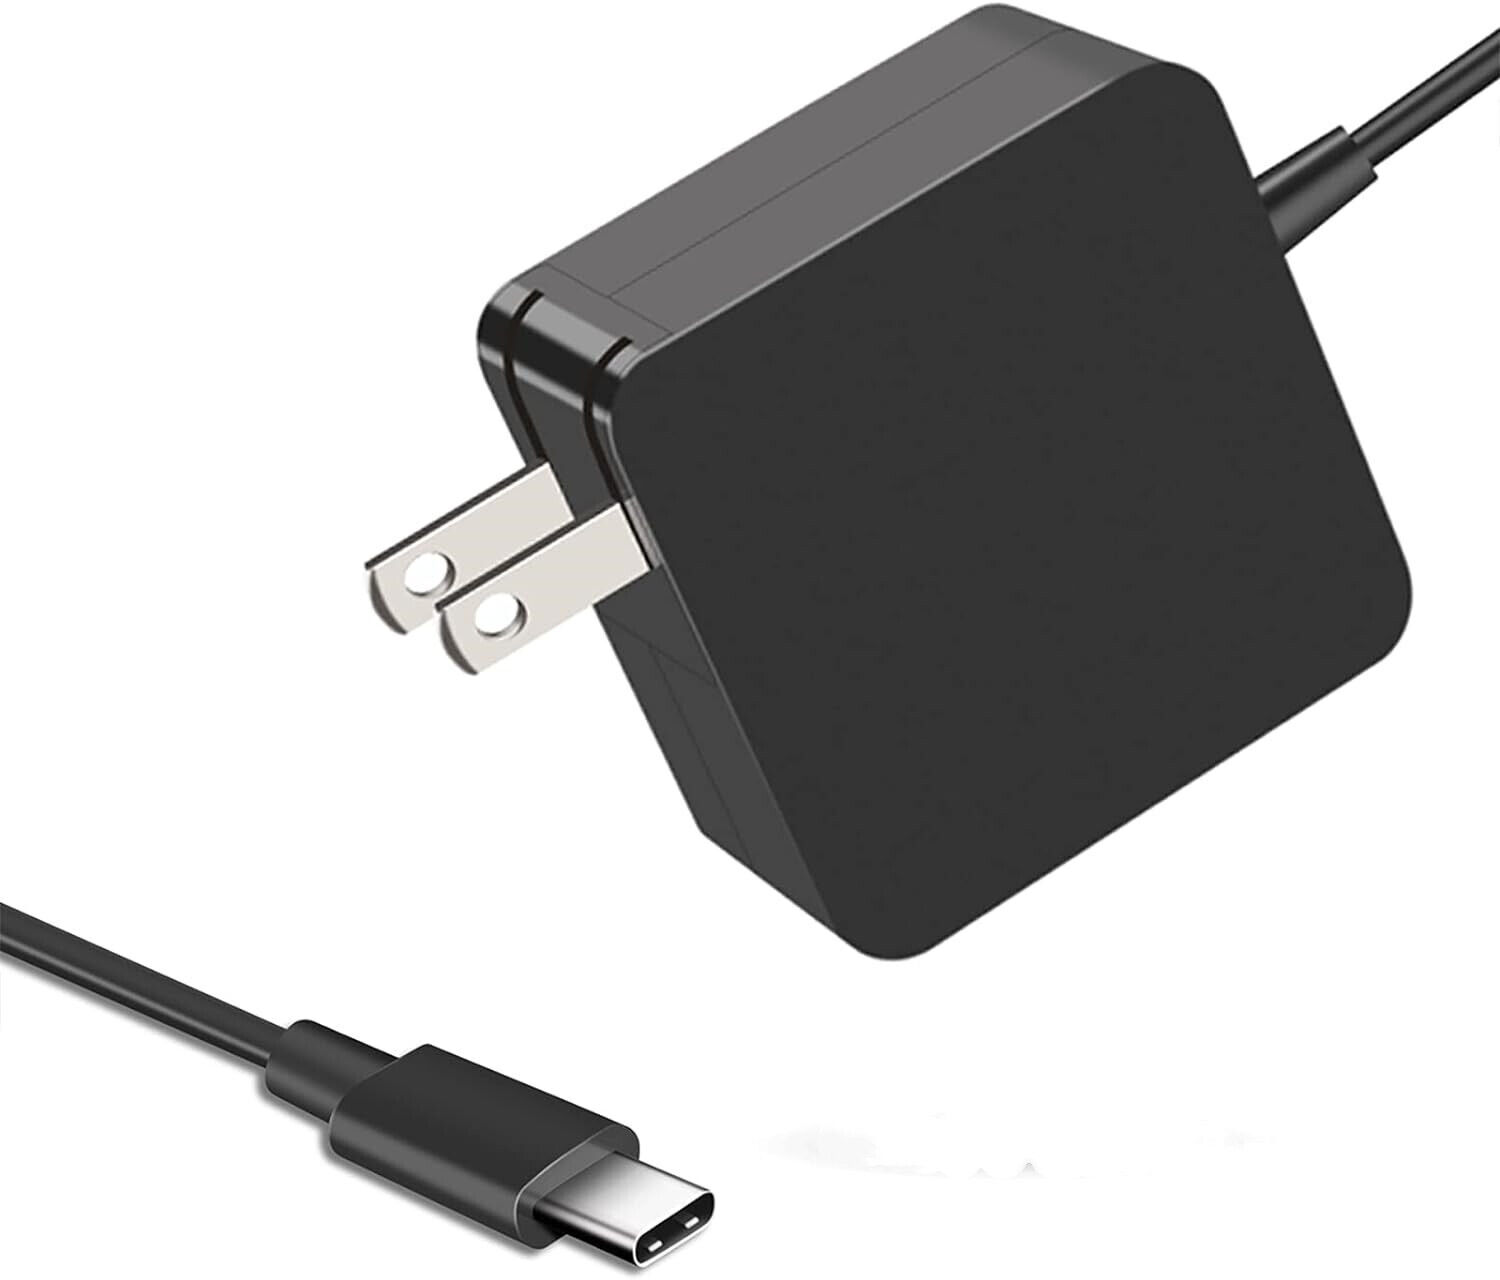 NEW 65W Laptop Charger Type C USB-C AC Adapter for Lenovo, Asus, MacBook pro